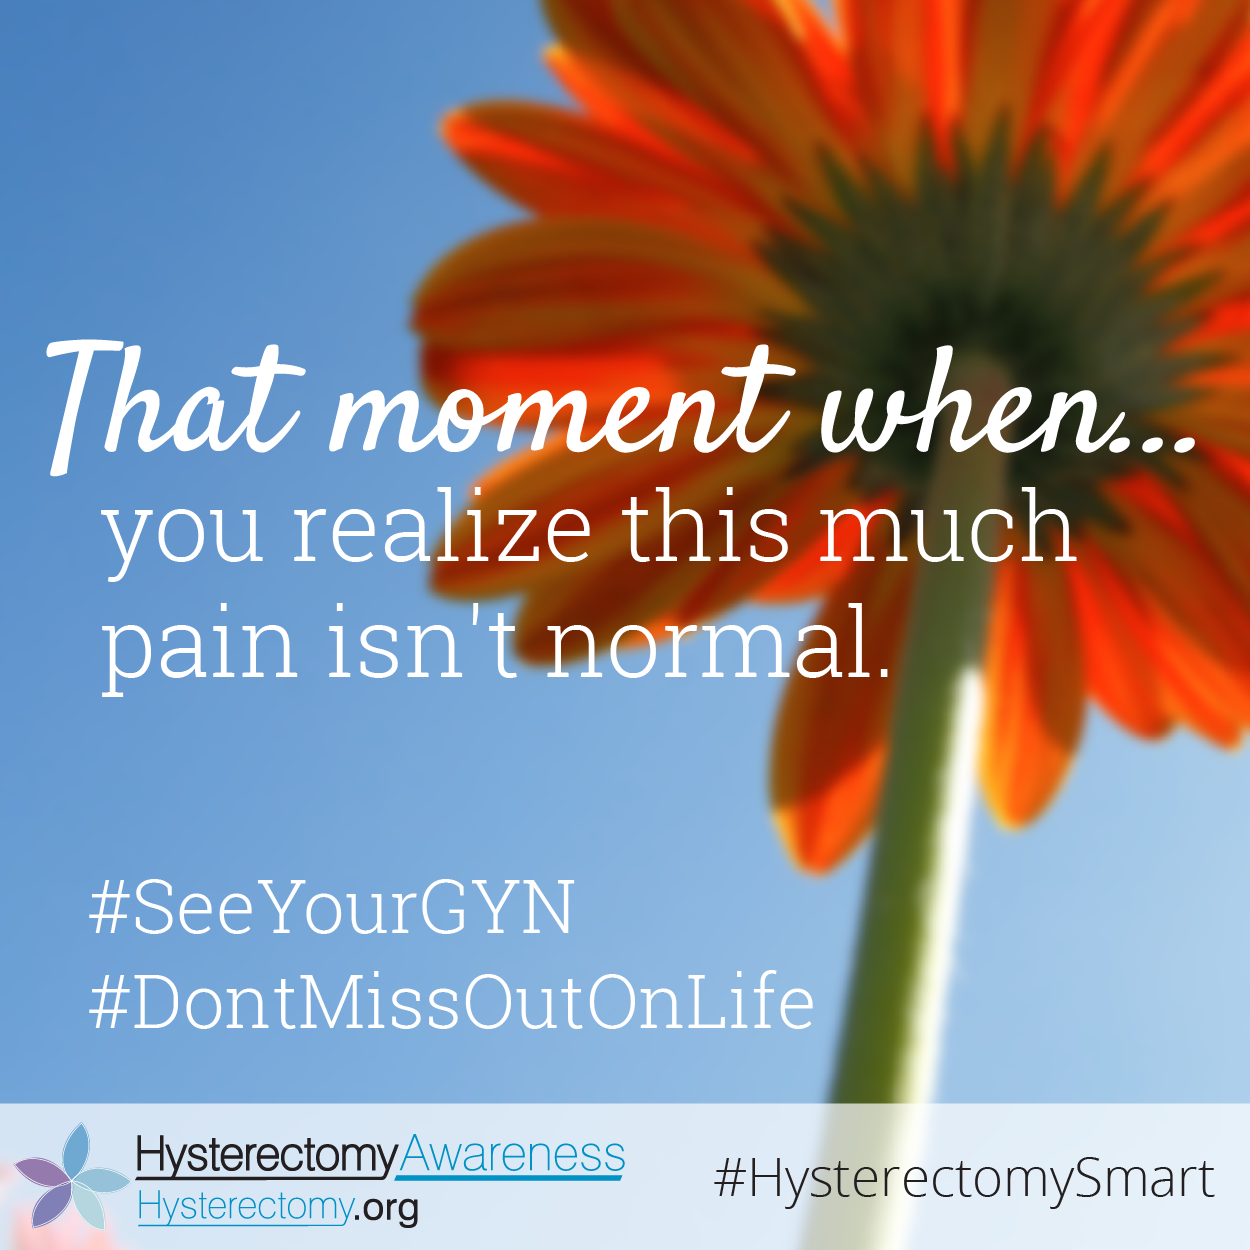 The moment you realize this much pain isn’t normal. #SeeYourGYN #Don’tMissOutOnLife #HysterectomySmart